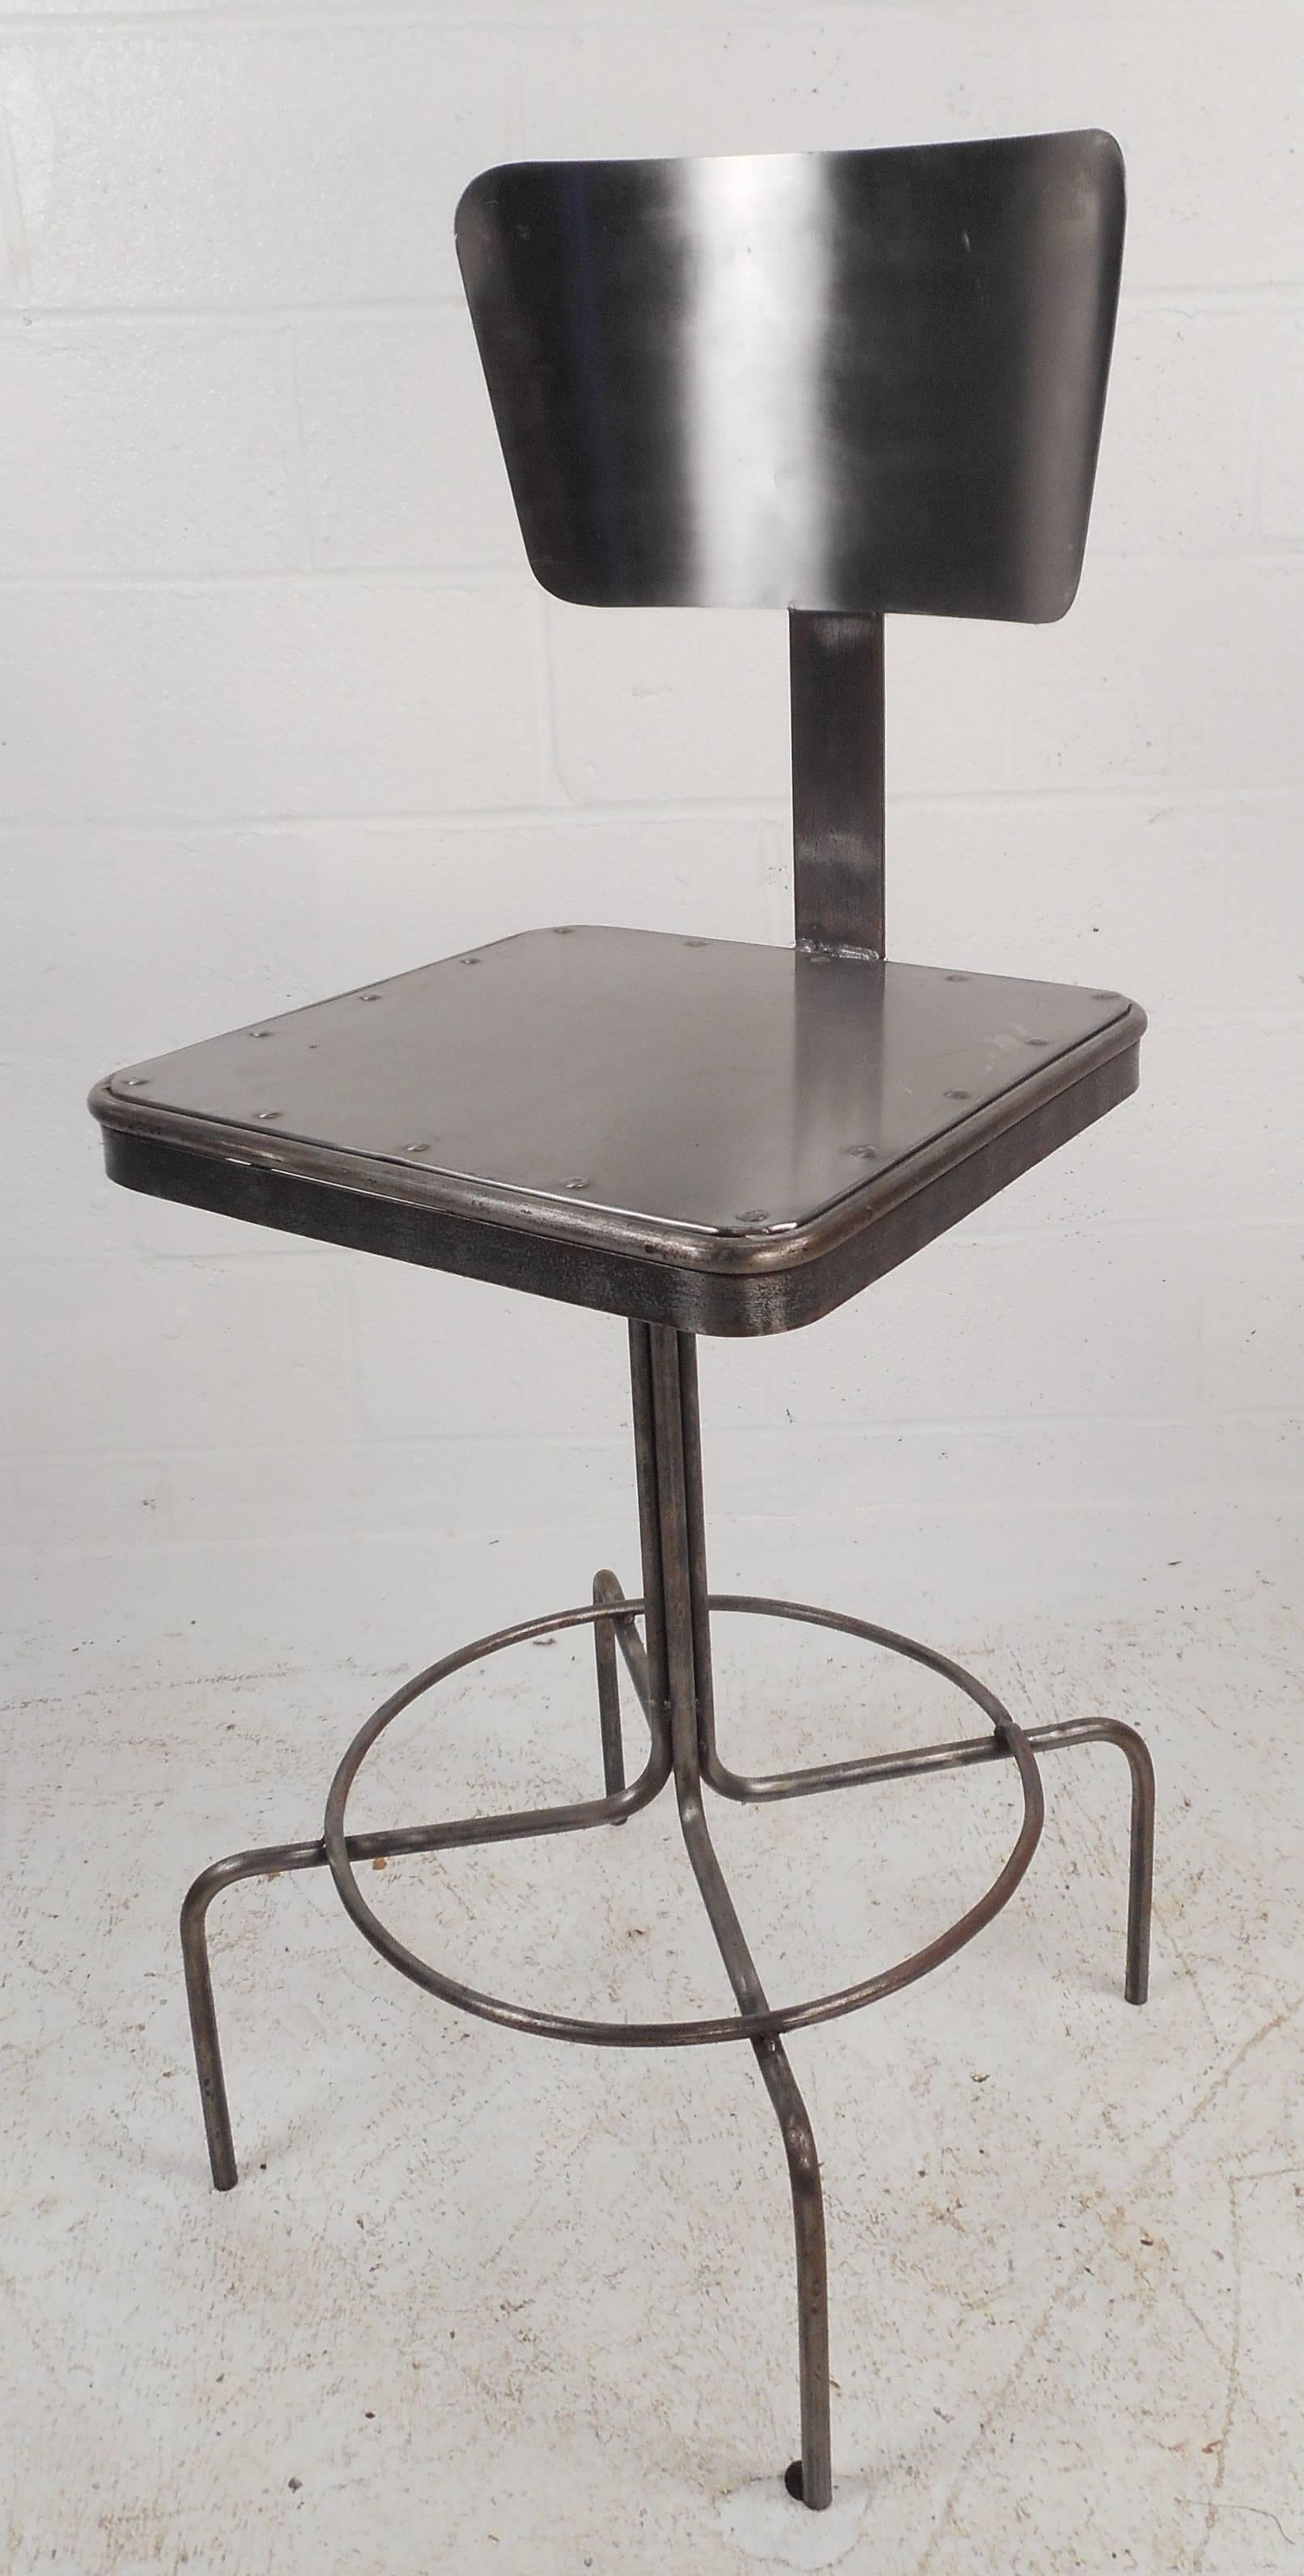  Industrial metal bar stool features unique curved backrest to provide extra comfort. The sleek four legged base is joined with a circular kick rest. The seat has rounded edges and rivets showcasing impressive industrial style design. Comfortable